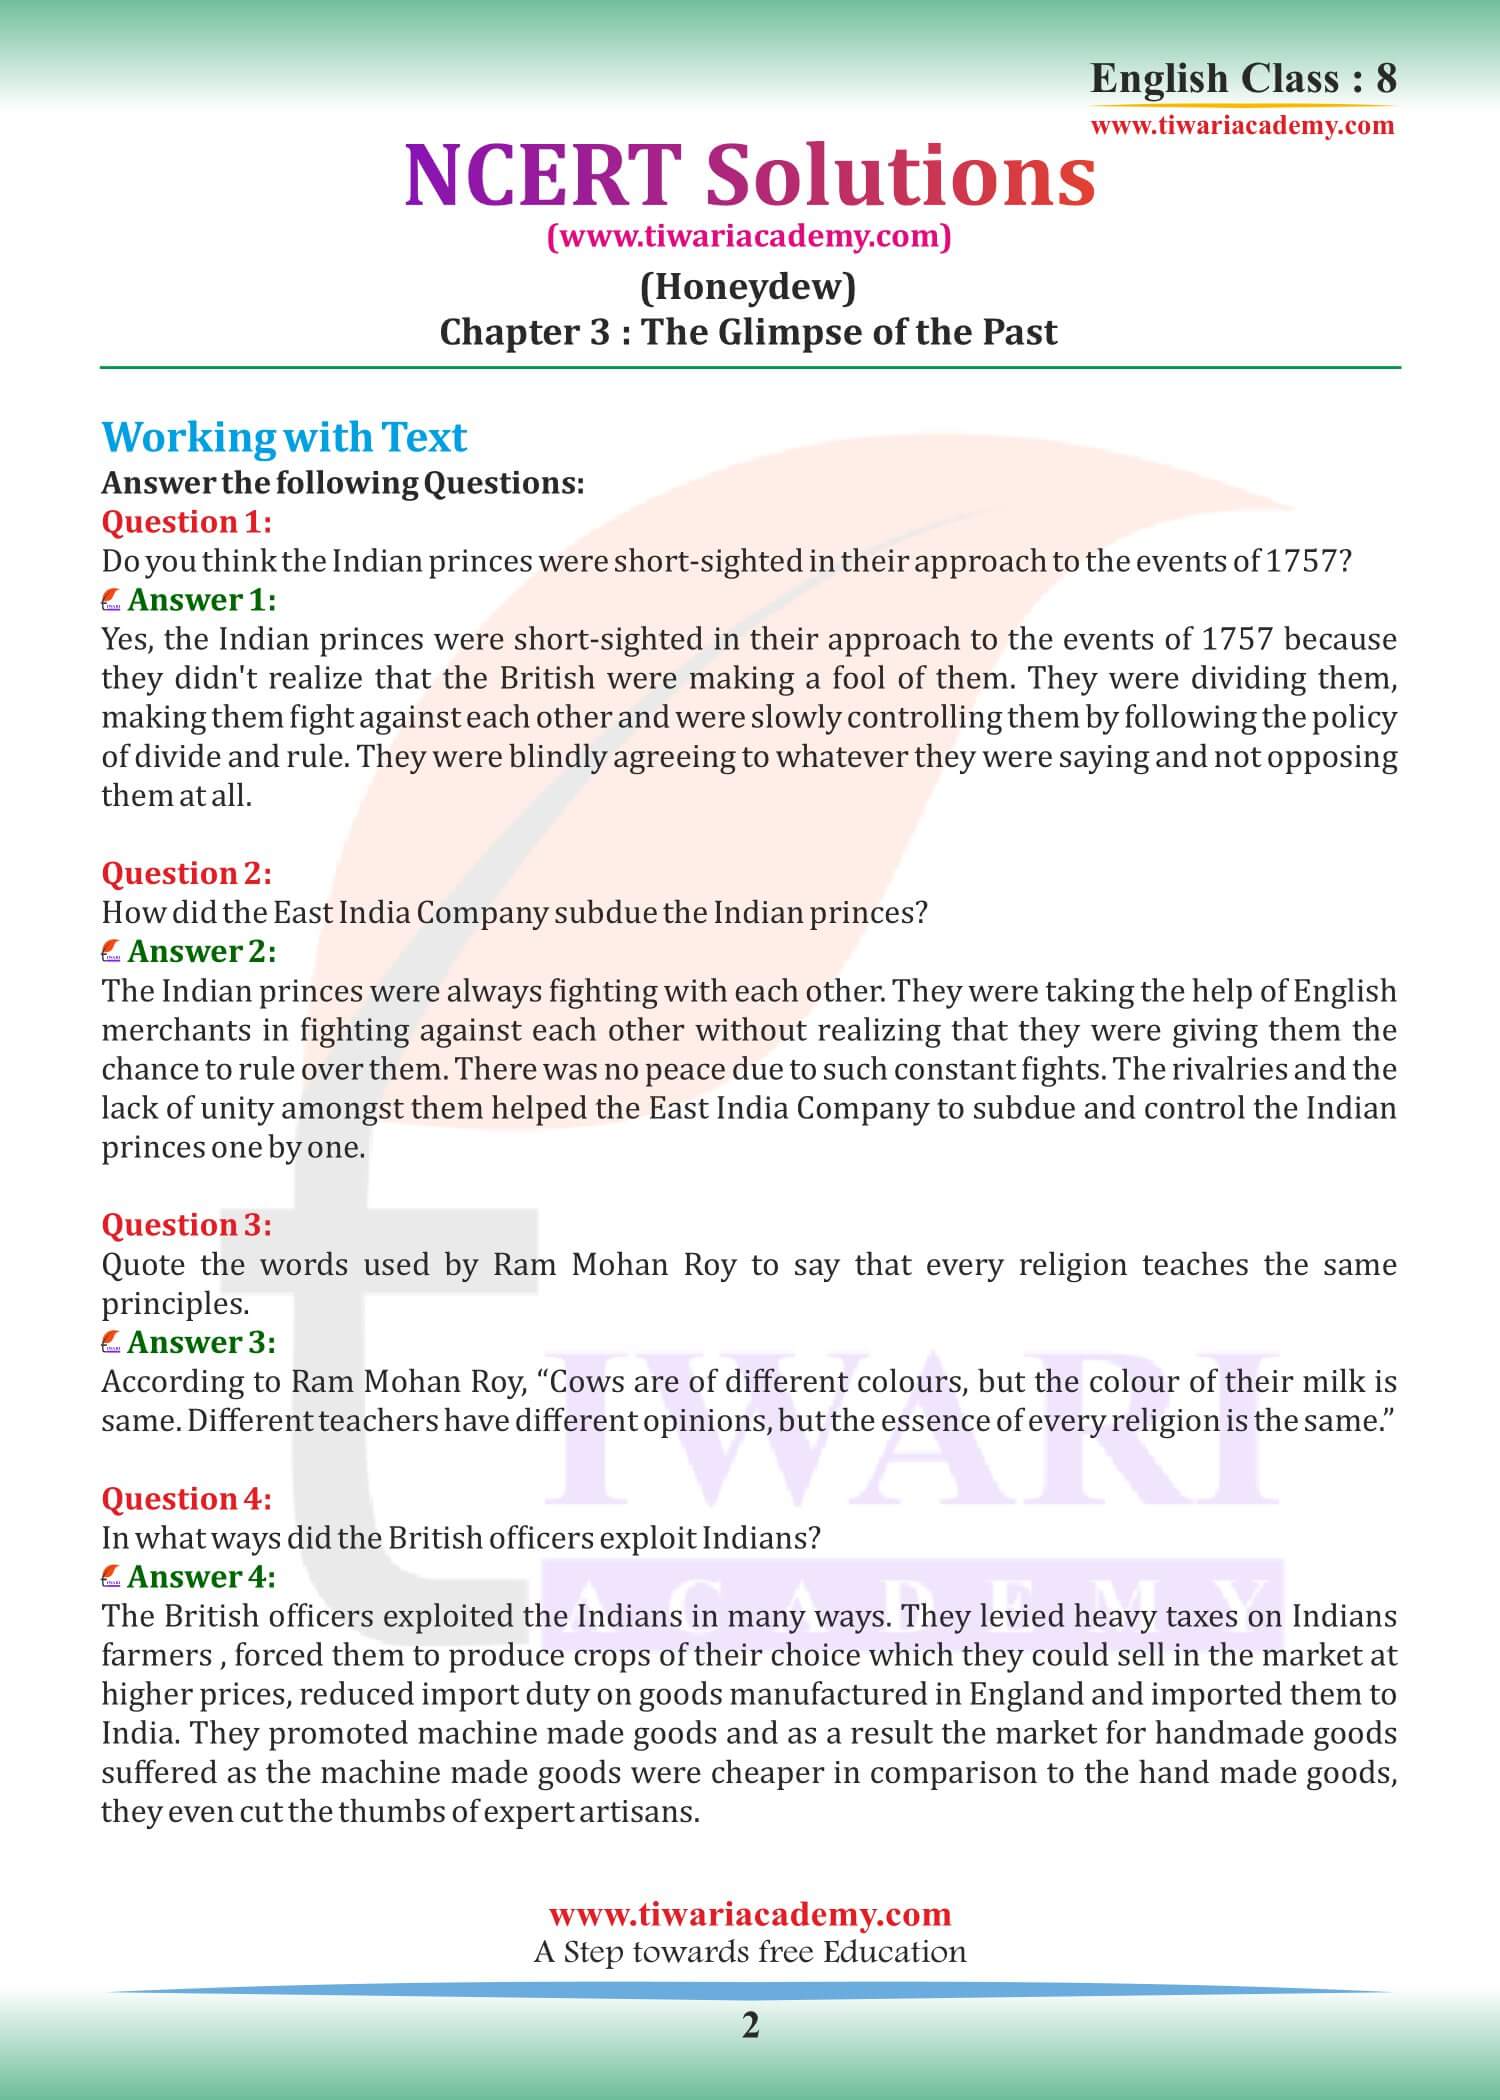 Class 8 English Honeydew Chapter 3 Glimpses of the Past